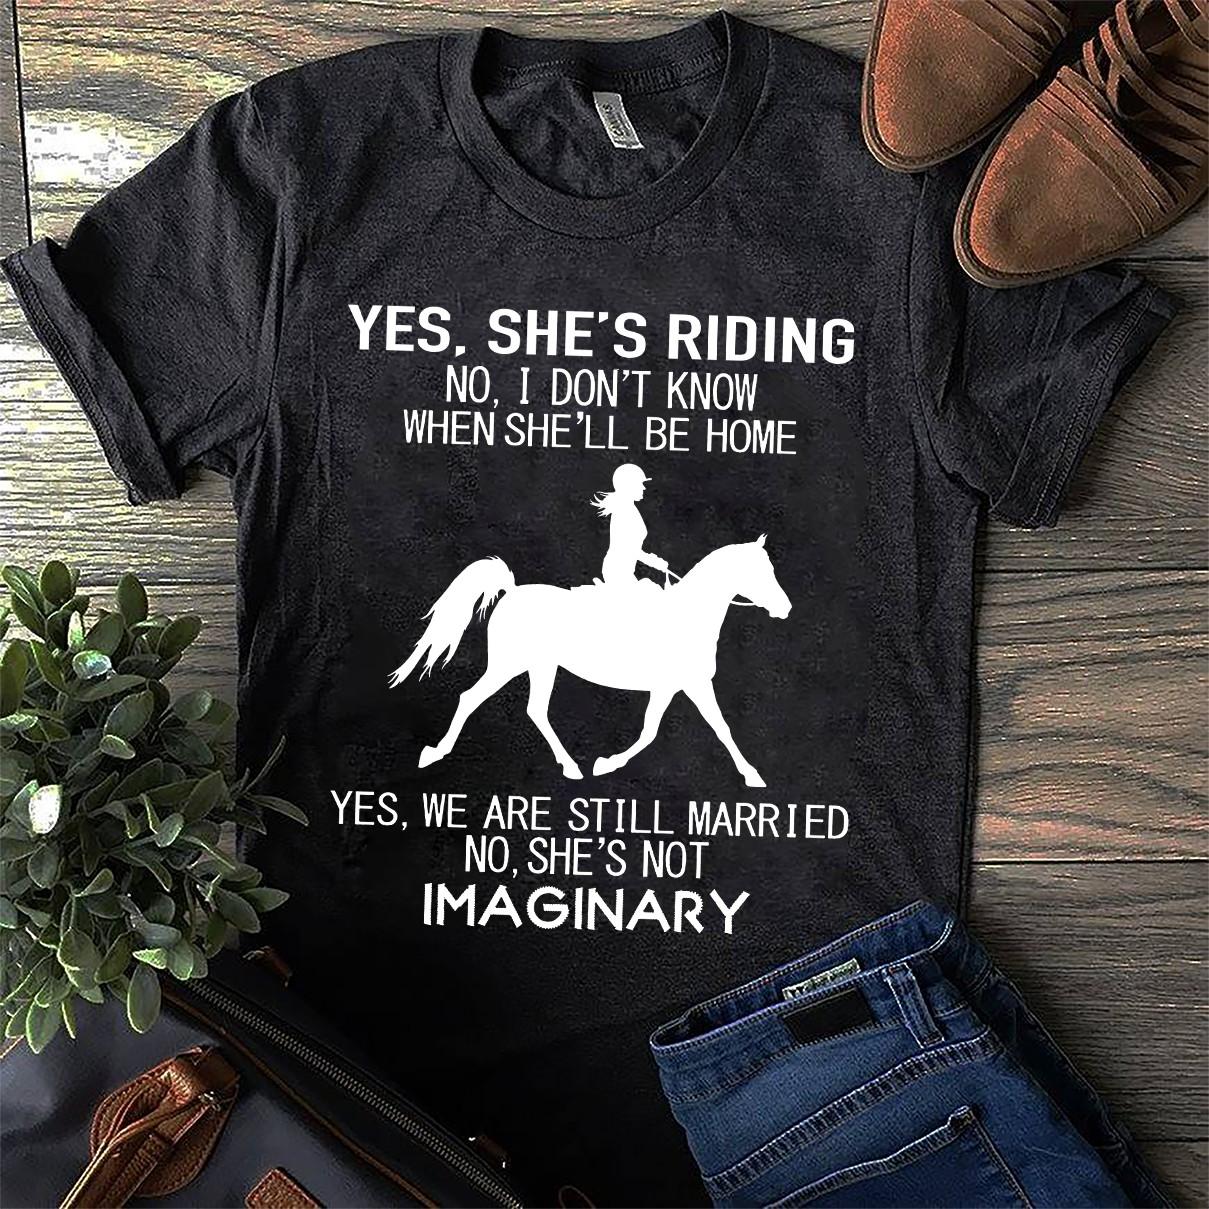 Girl Riding Horse - Yes she's riding no i don't know when she'll be home yes we are still married no she's not imaginary